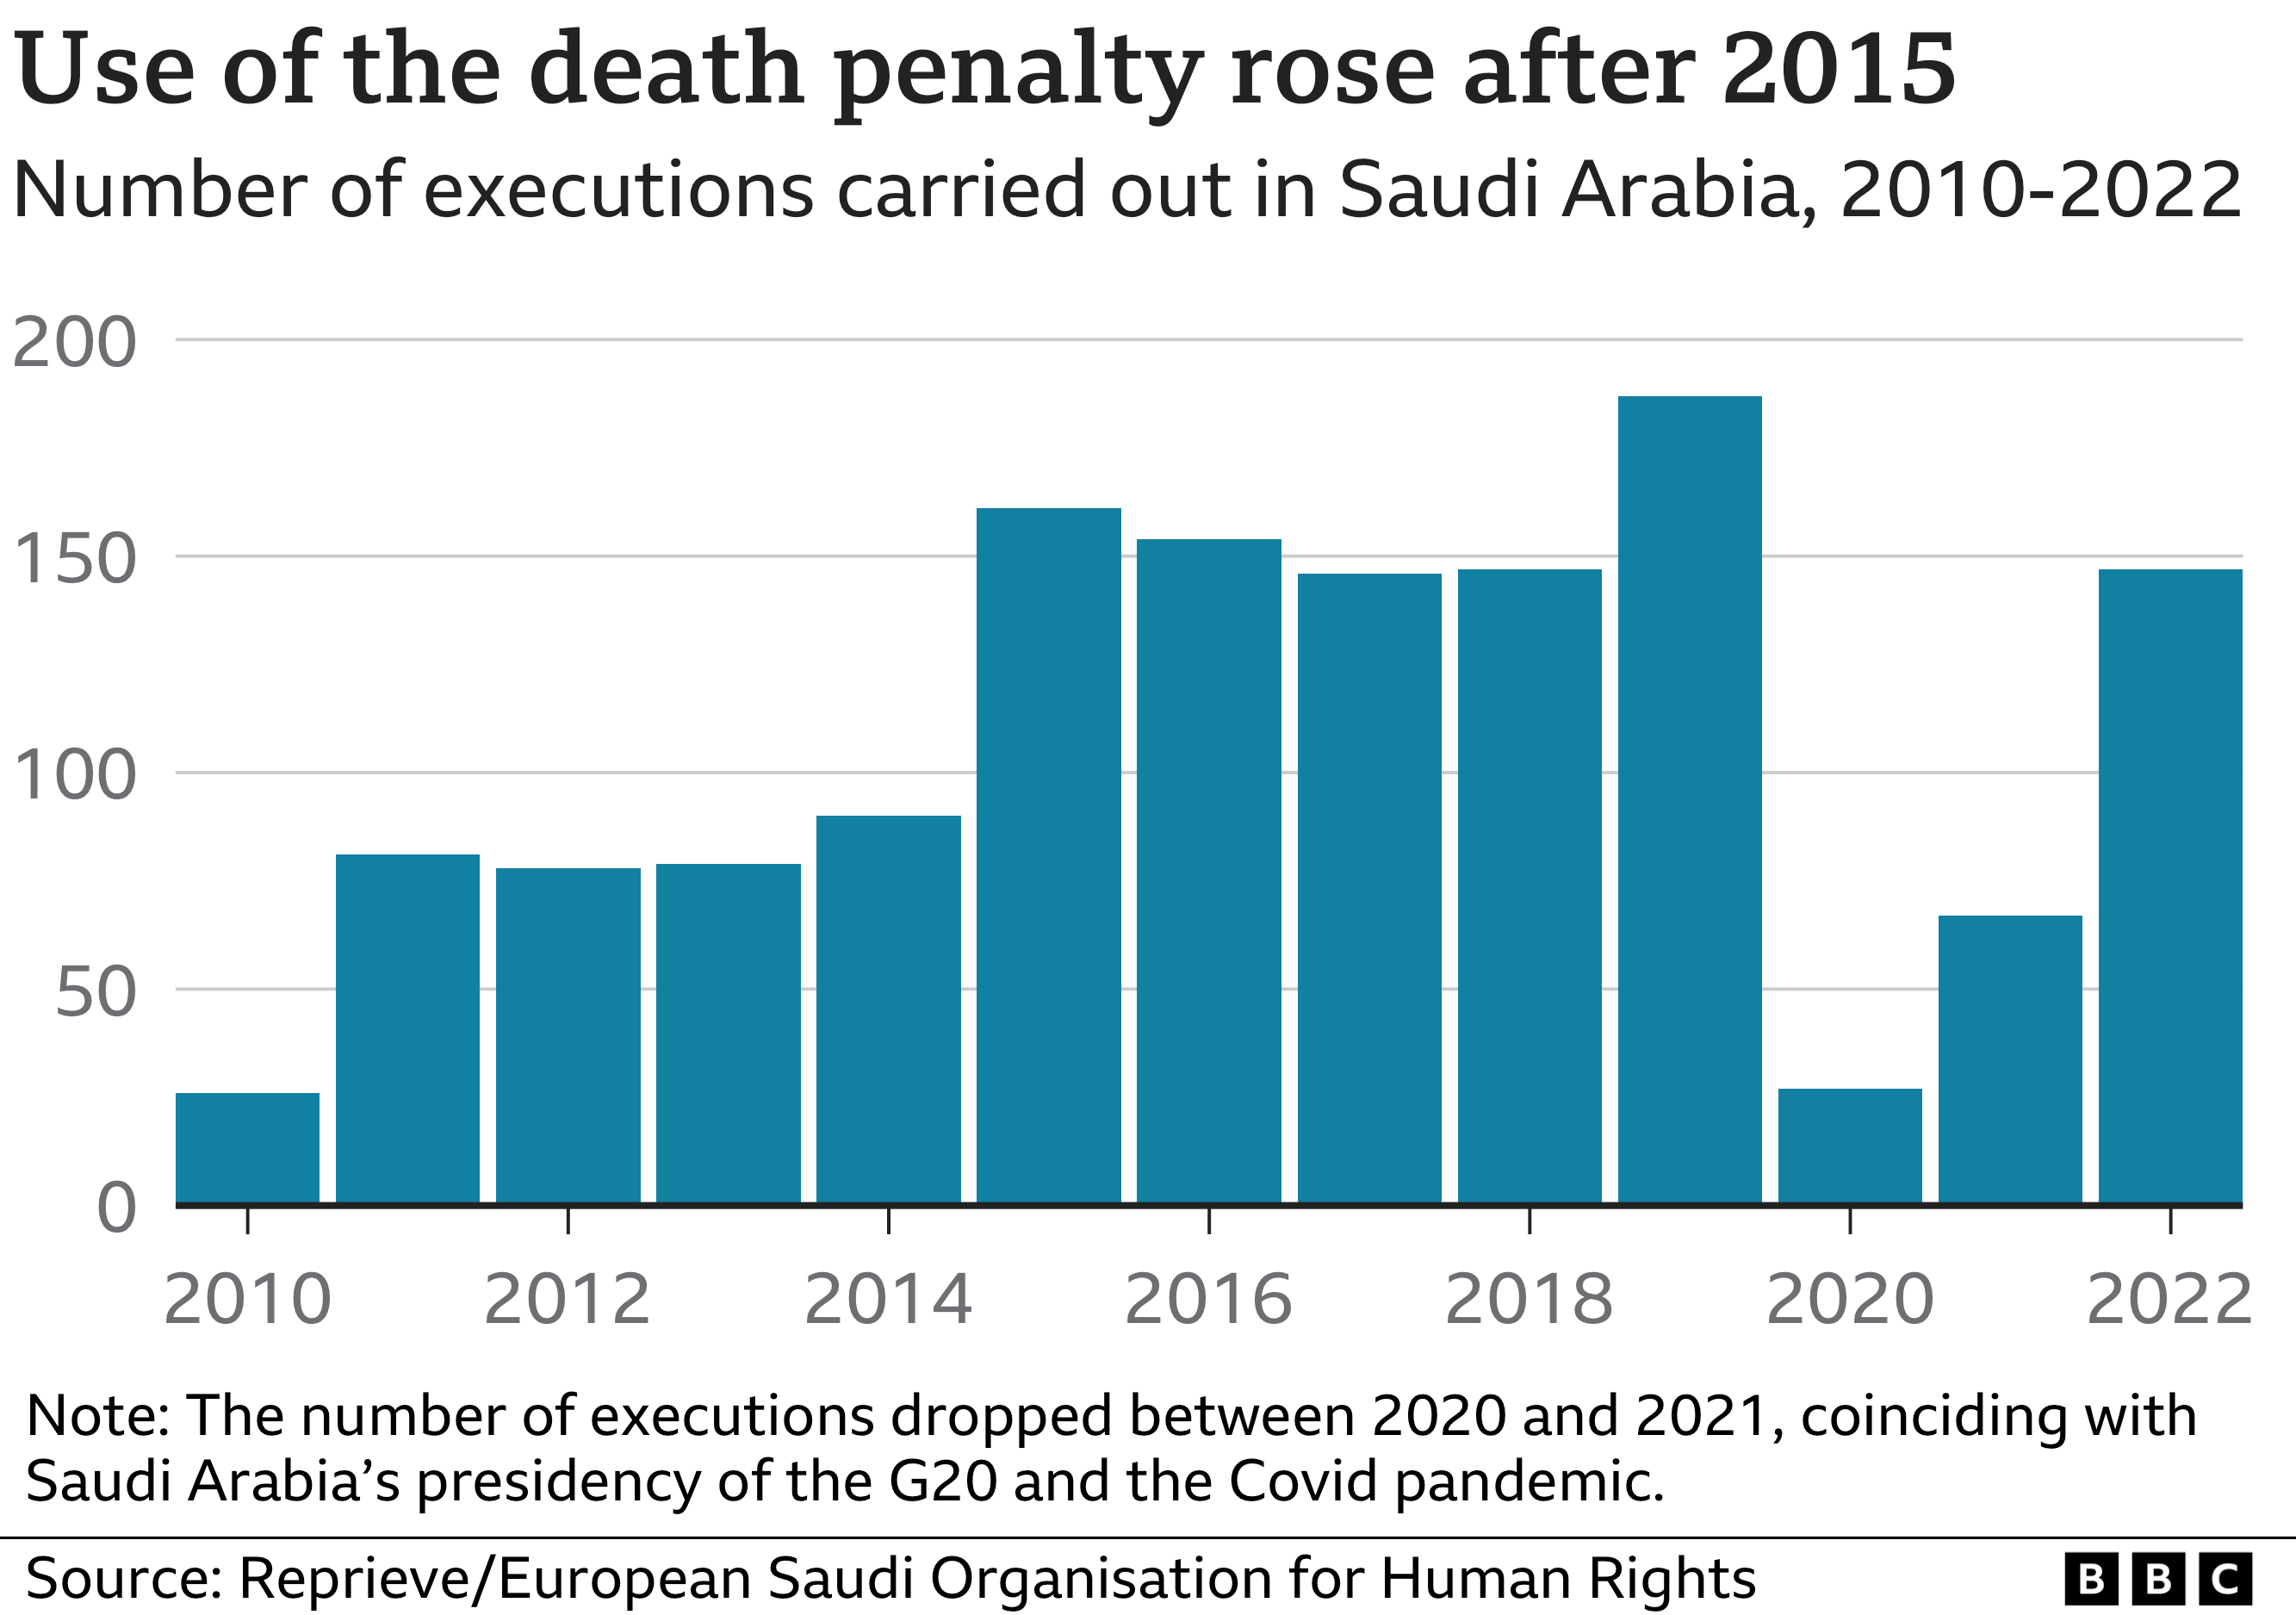 A bar chart showing the number of executions carried out in Saudi Arabia between 2010 and 2022: in 2010 it was 26, it was between 78 and 90 in the following four years, it jumped to 161 in 2015 and stayed high before it peaked at 187 in 2019. The numbers fell to 27 in 2020 and 67 in 2021, coinciding with the Covid pandemic and Saudi Arabia’s presidency of the G20, before rising to 147 in 2022.